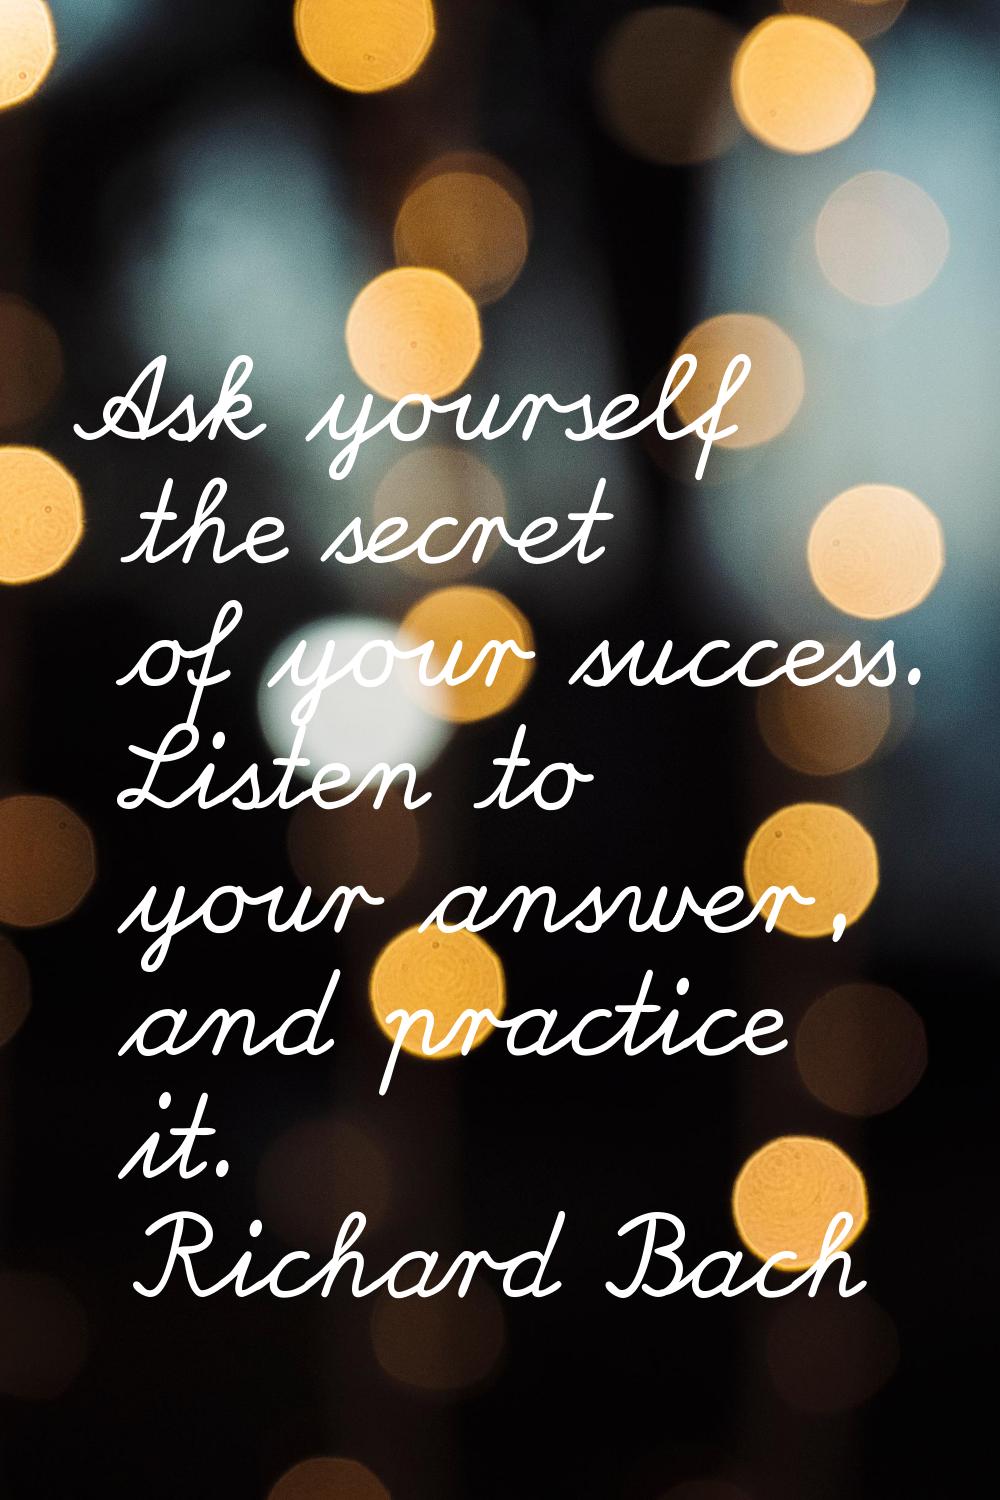 Ask yourself the secret of your success. Listen to your answer, and practice it.